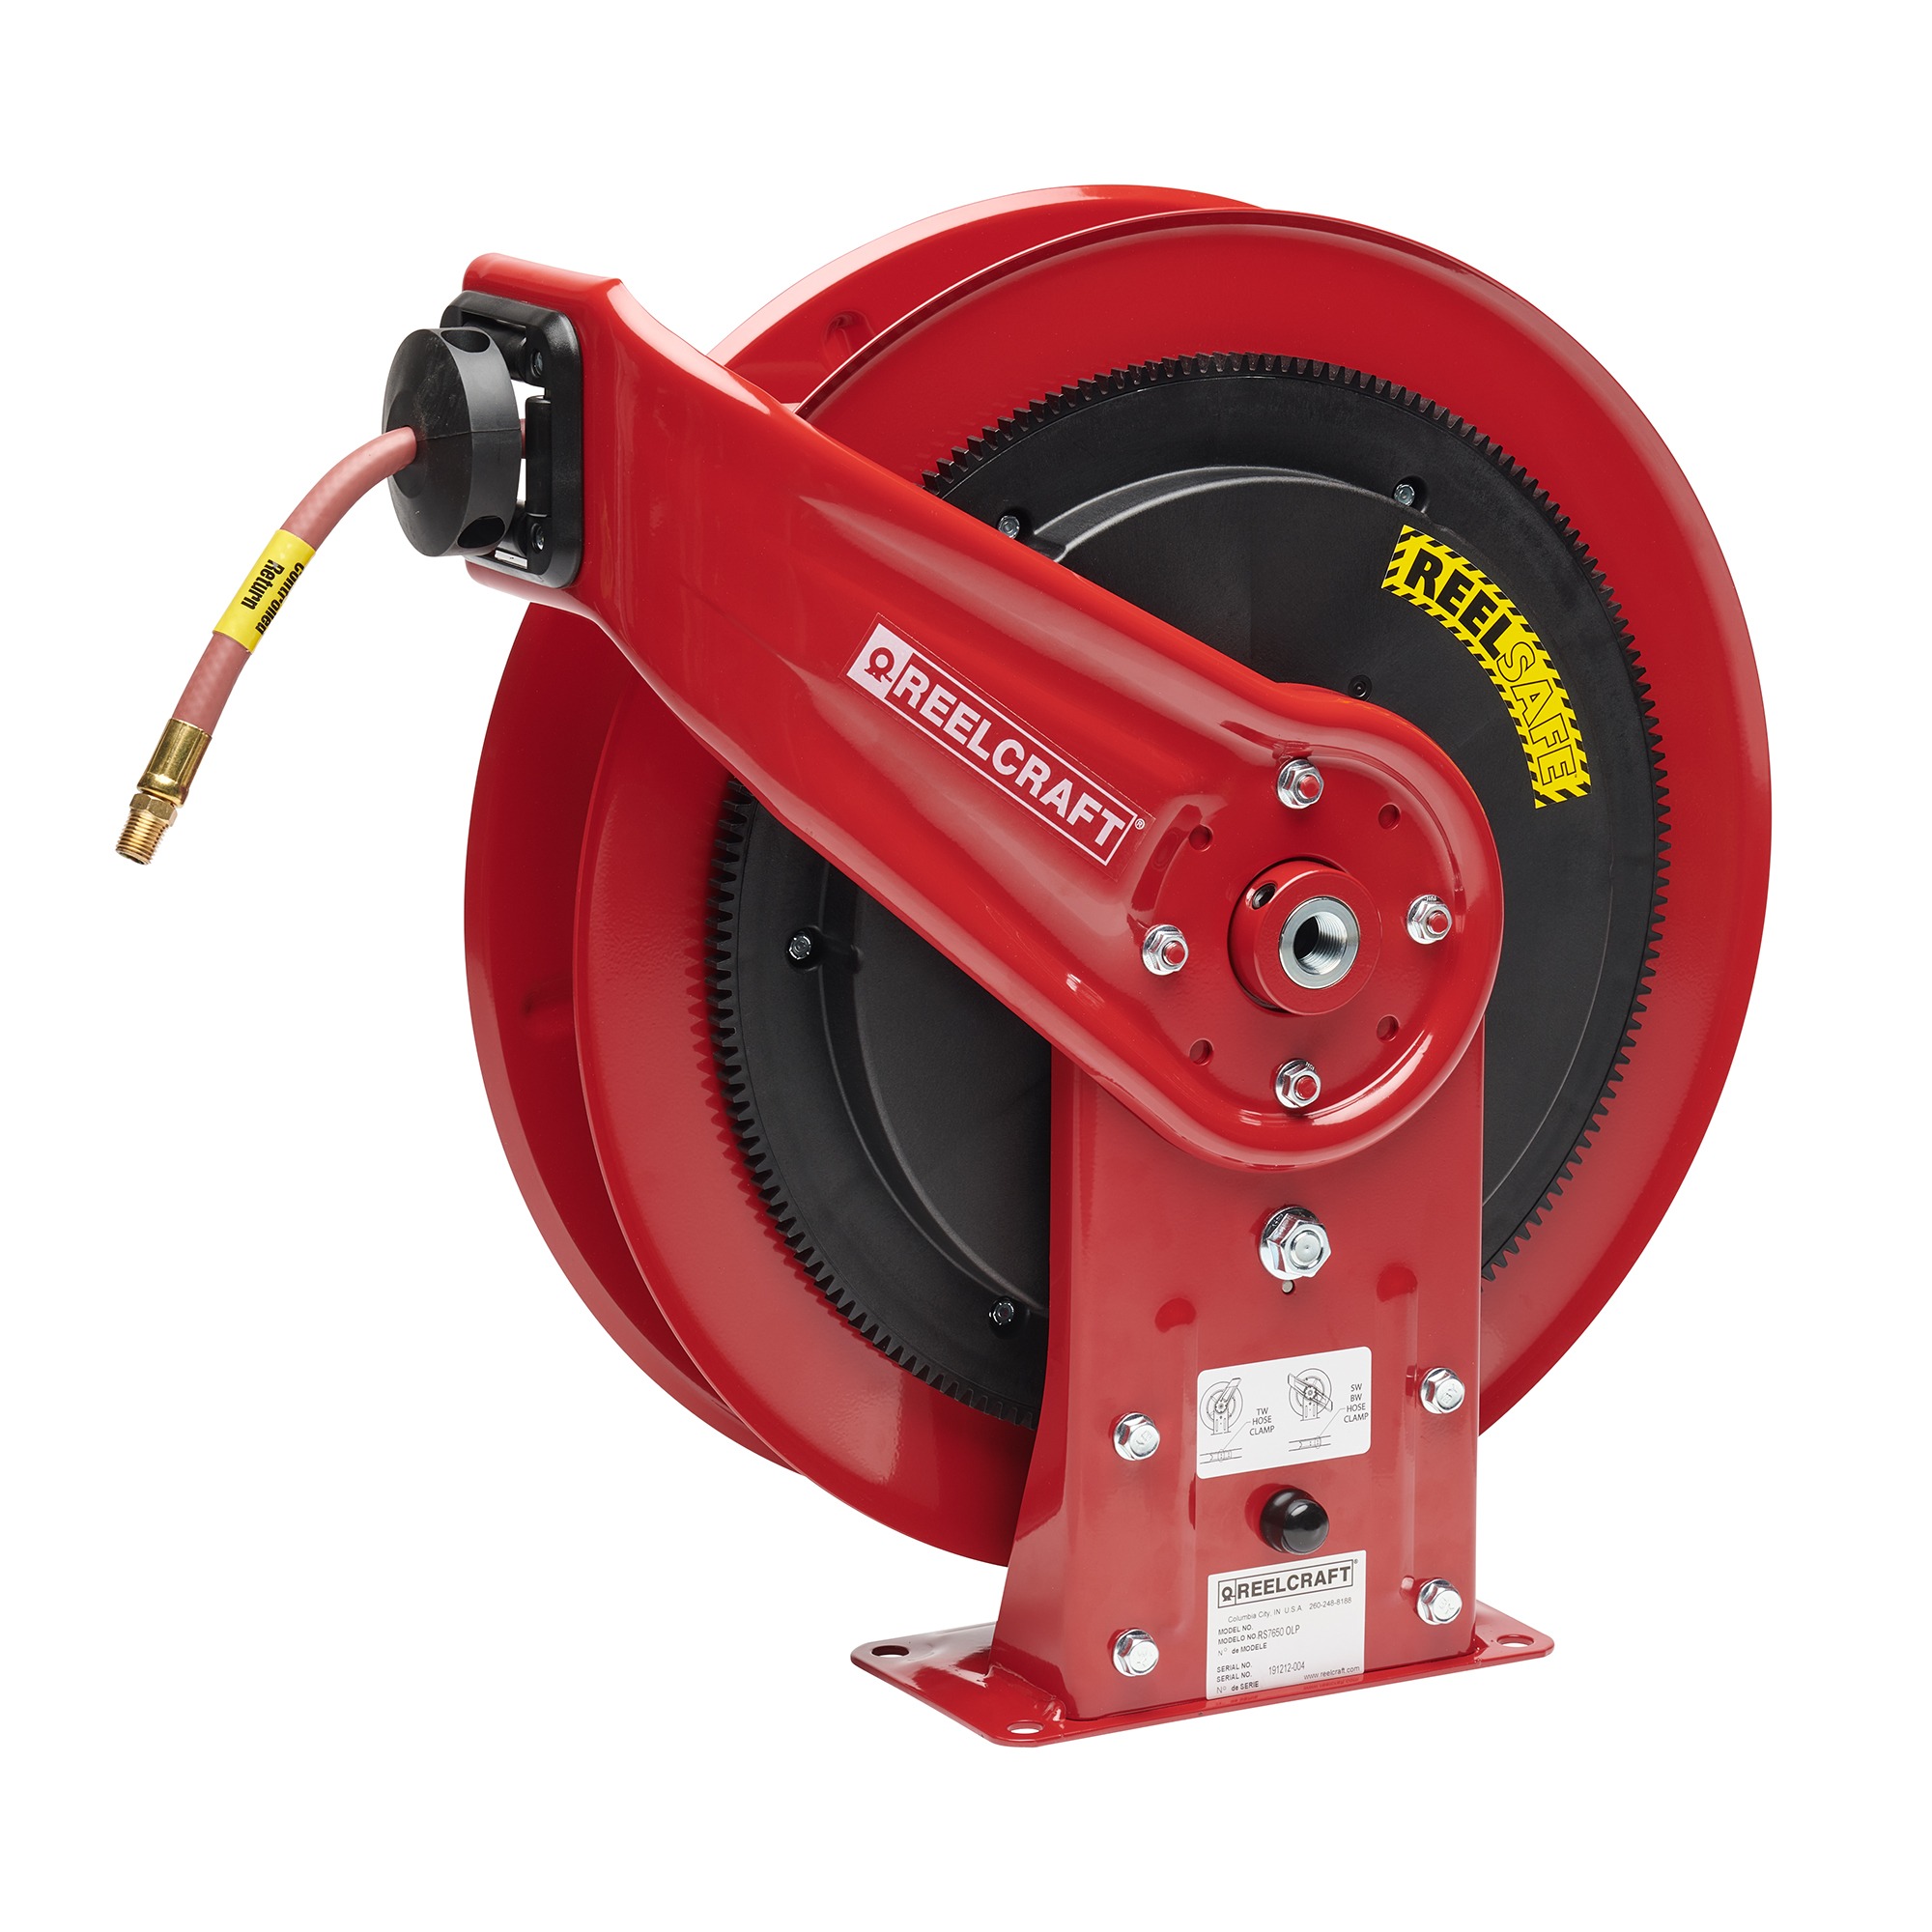 REELSAFE Controlled Return Air and Water Hose Reel